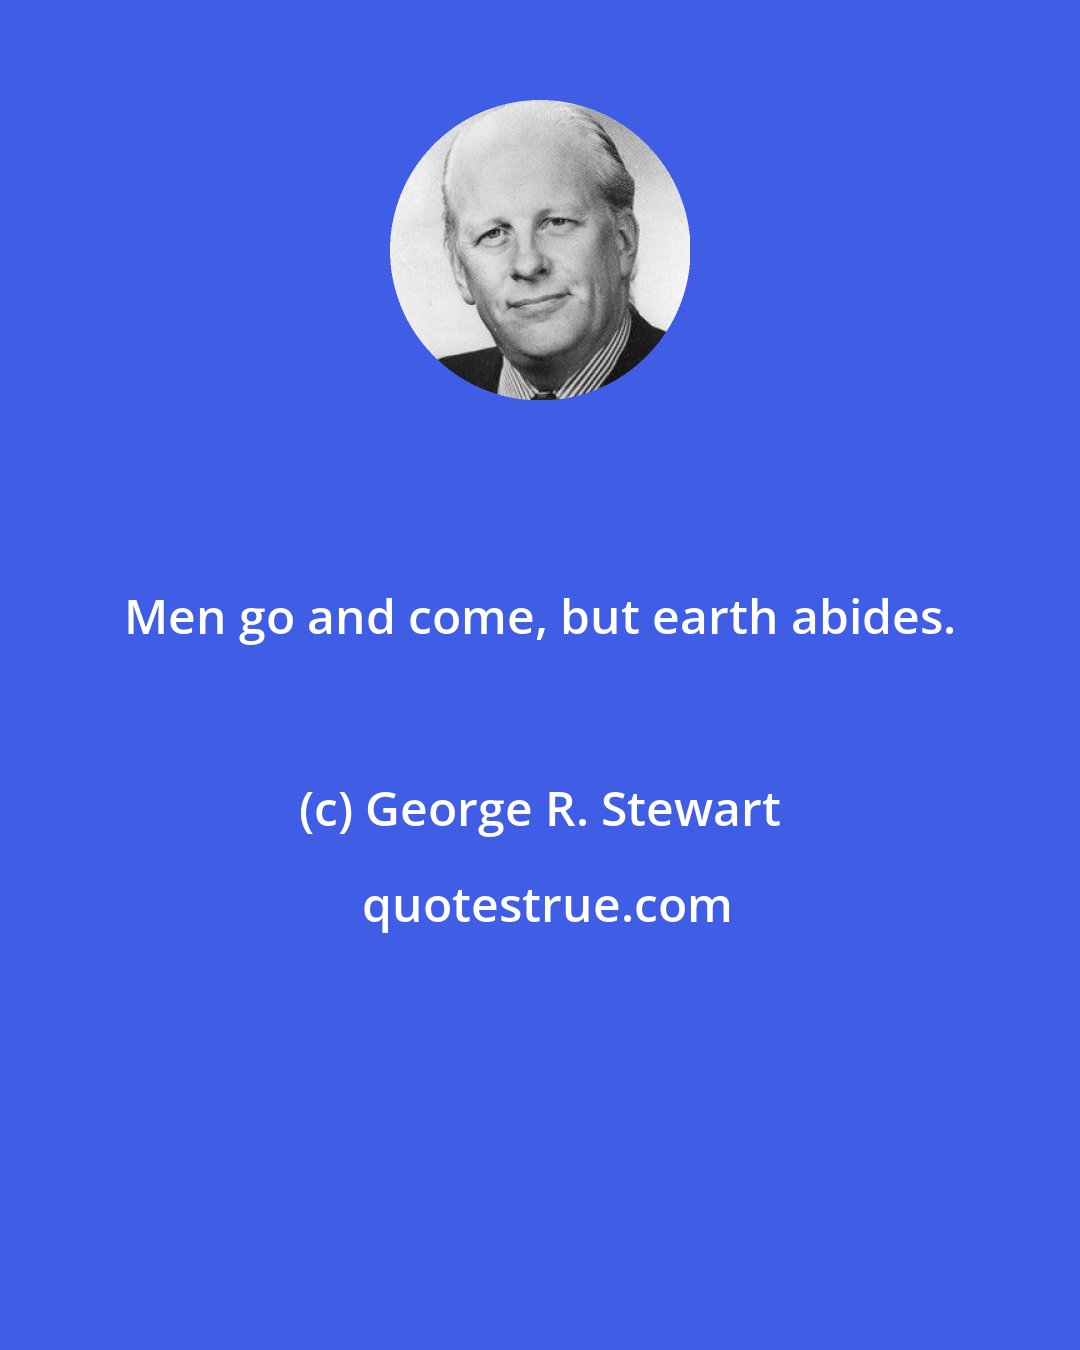 George R. Stewart: Men go and come, but earth abides.